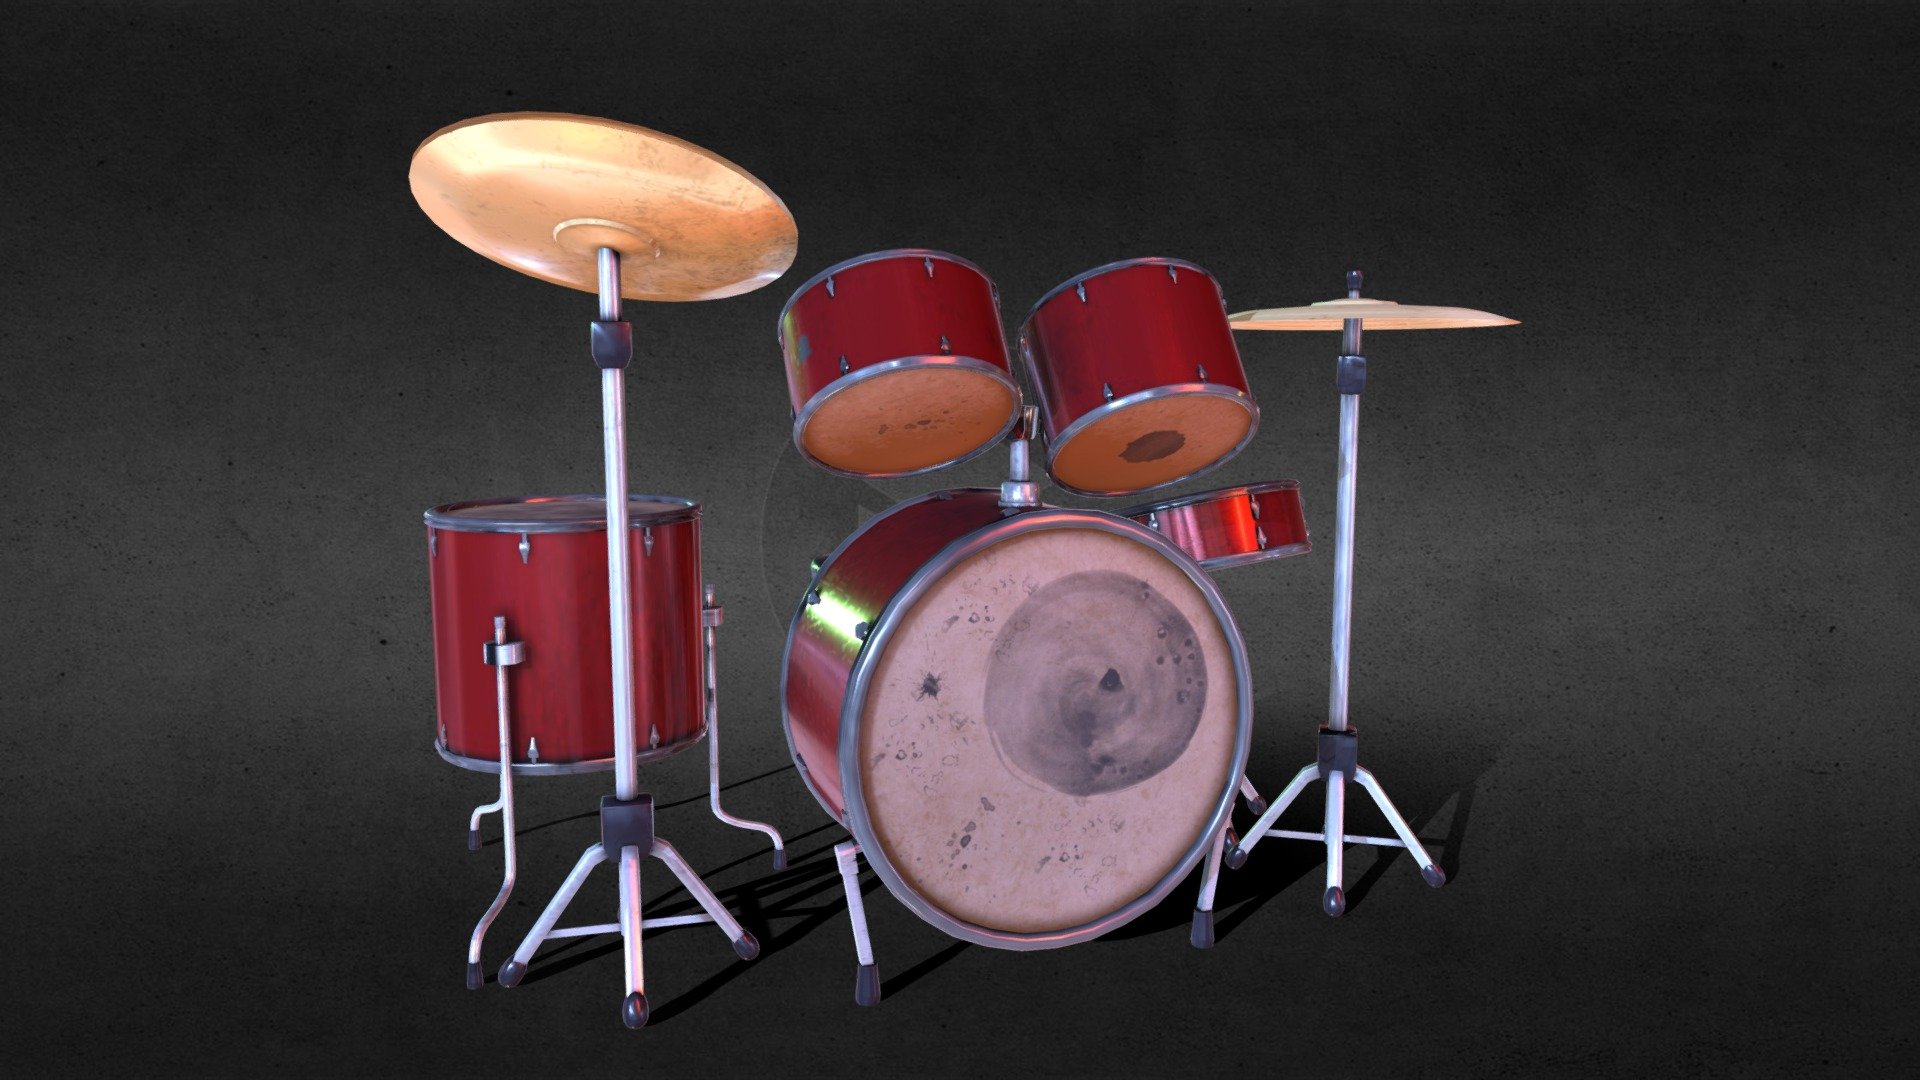 Third part of the project where i expect to create a musical instruments asset pack 3d model